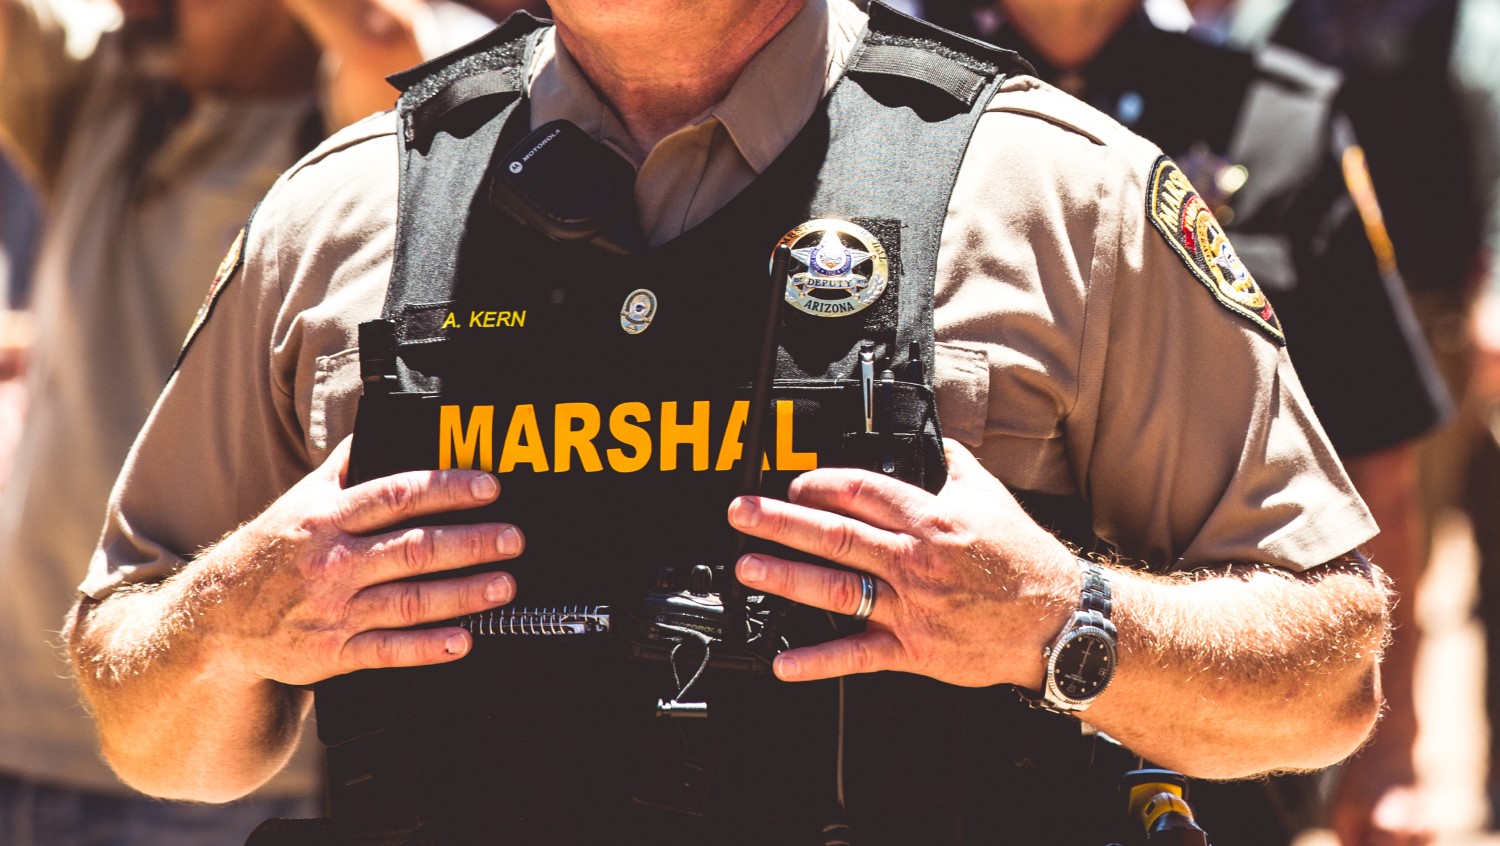 Us-marshals-service-seeks-firm-to-custody-and-sell-crypto-seized-from-criminals